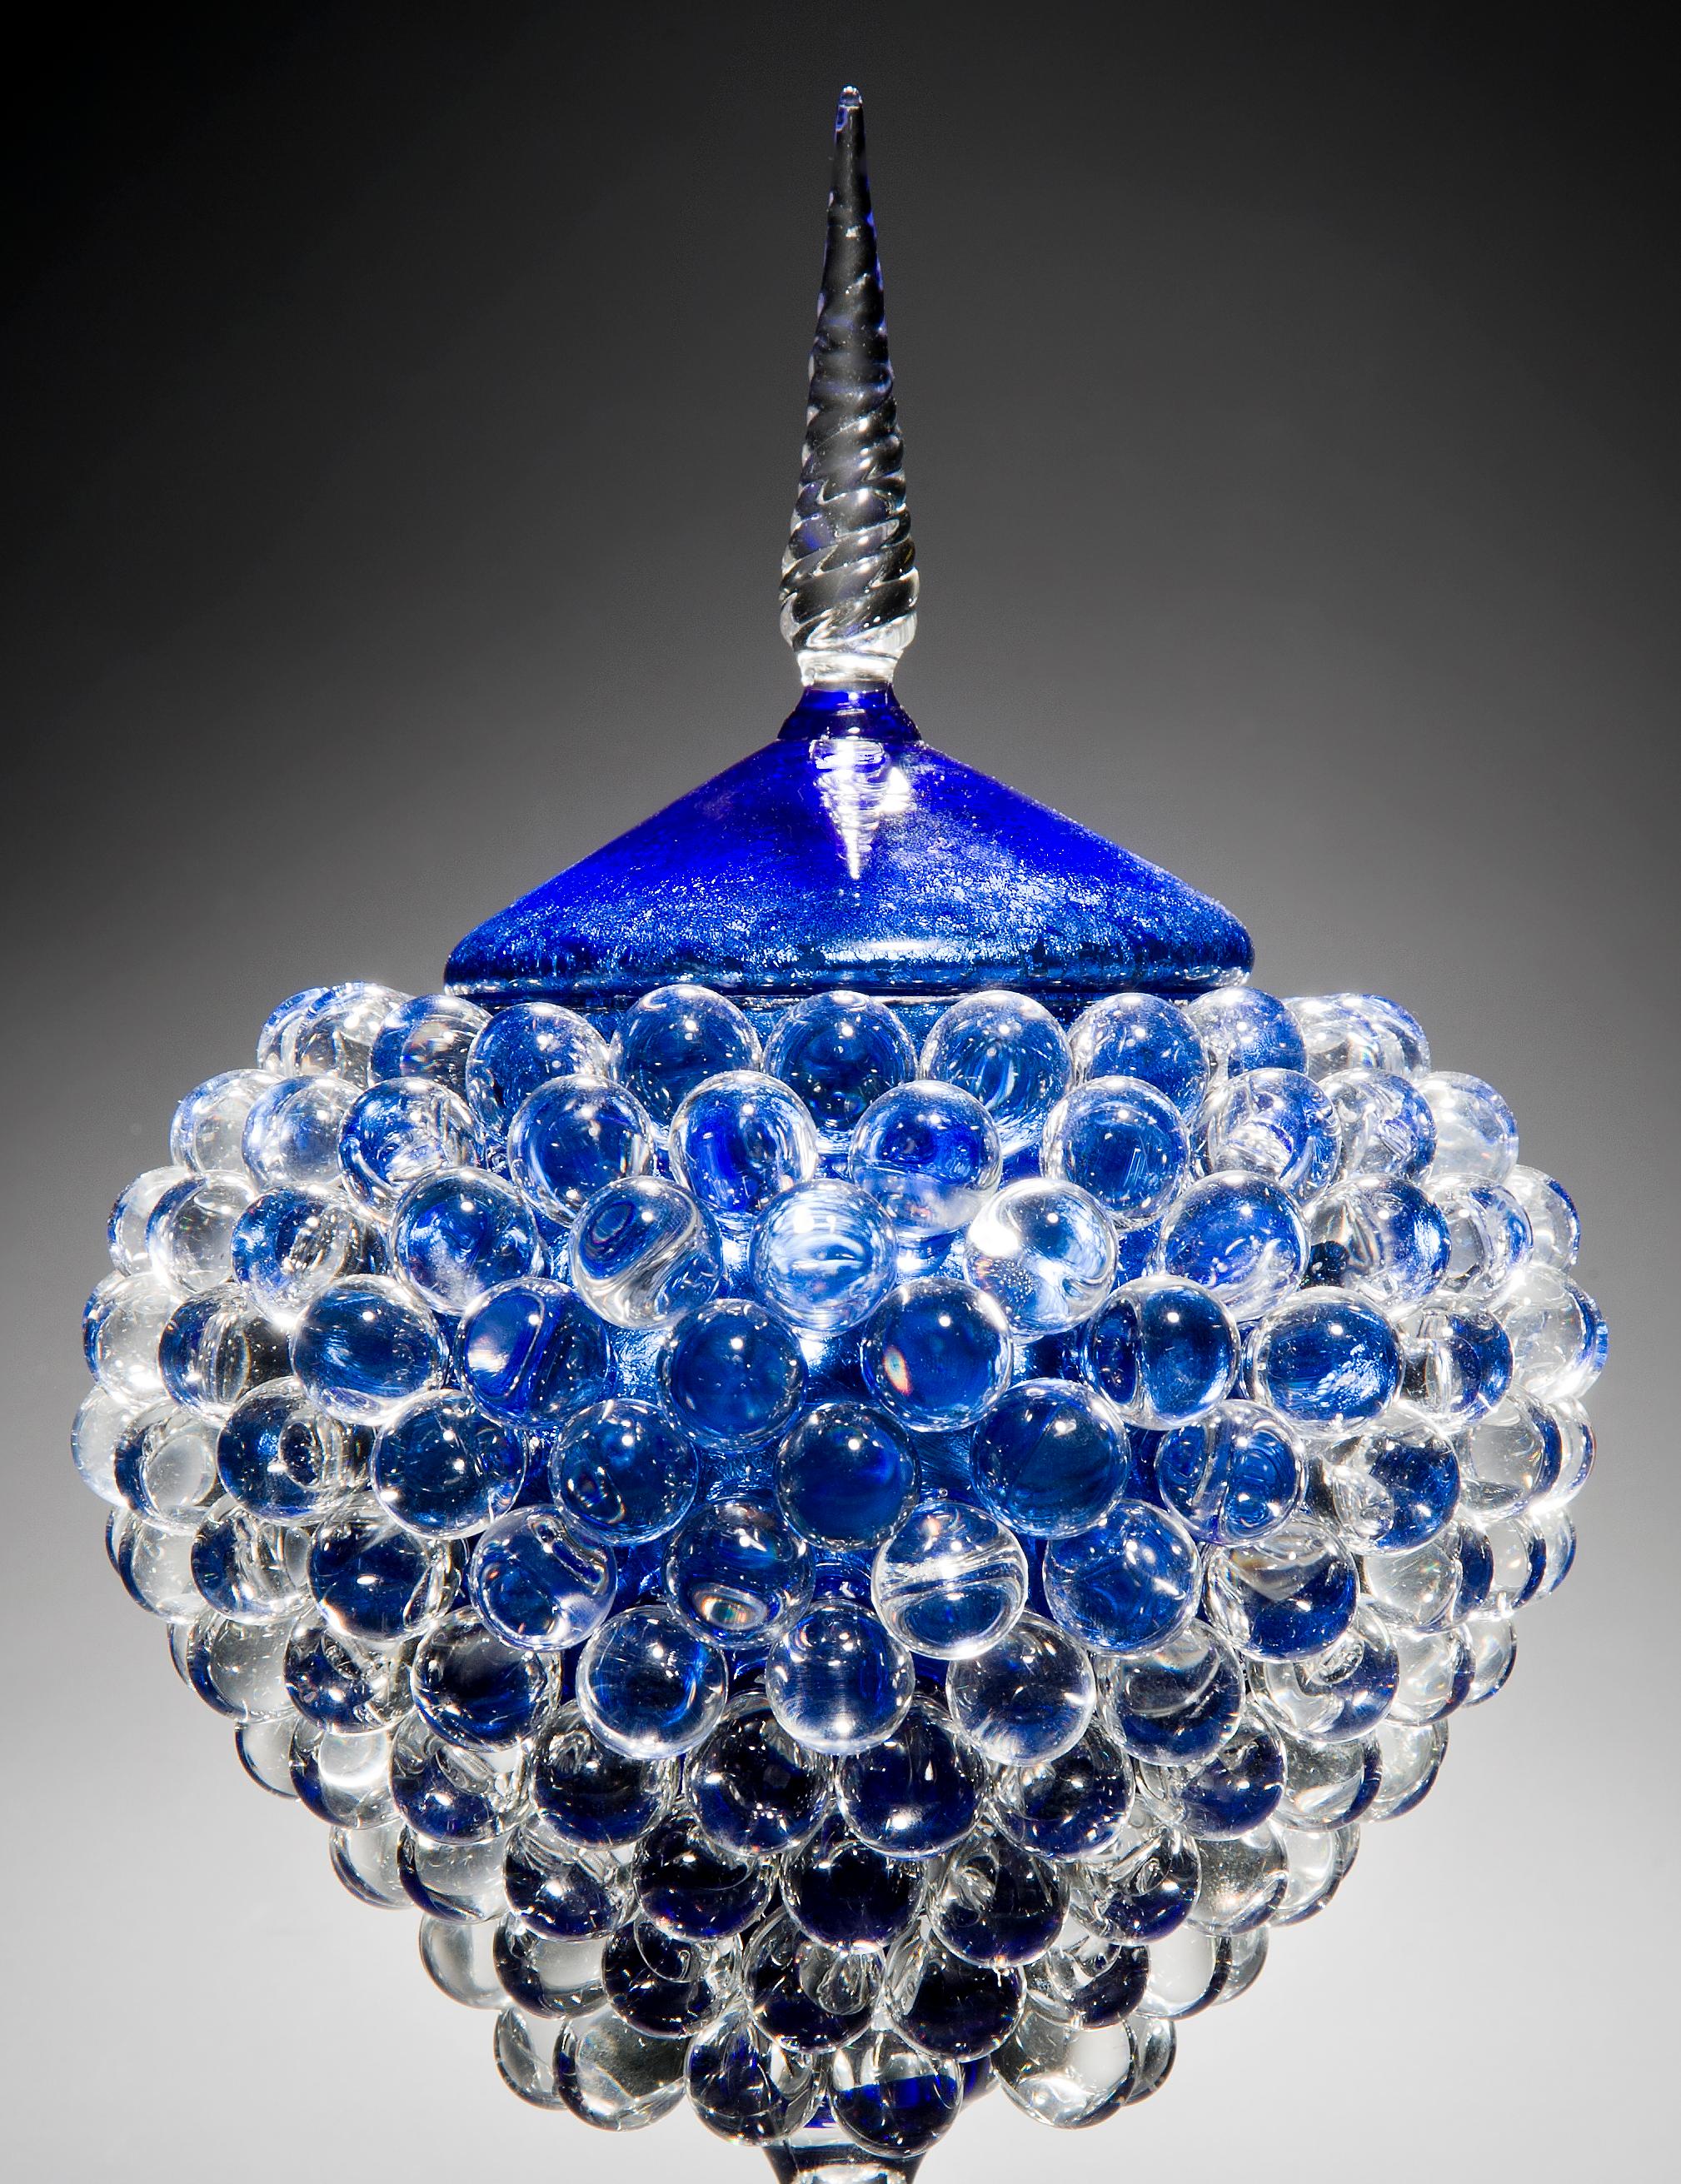 Empoli Jar with Spike, a unique clear & blue glass vessel by James Lethbridge For Sale 1